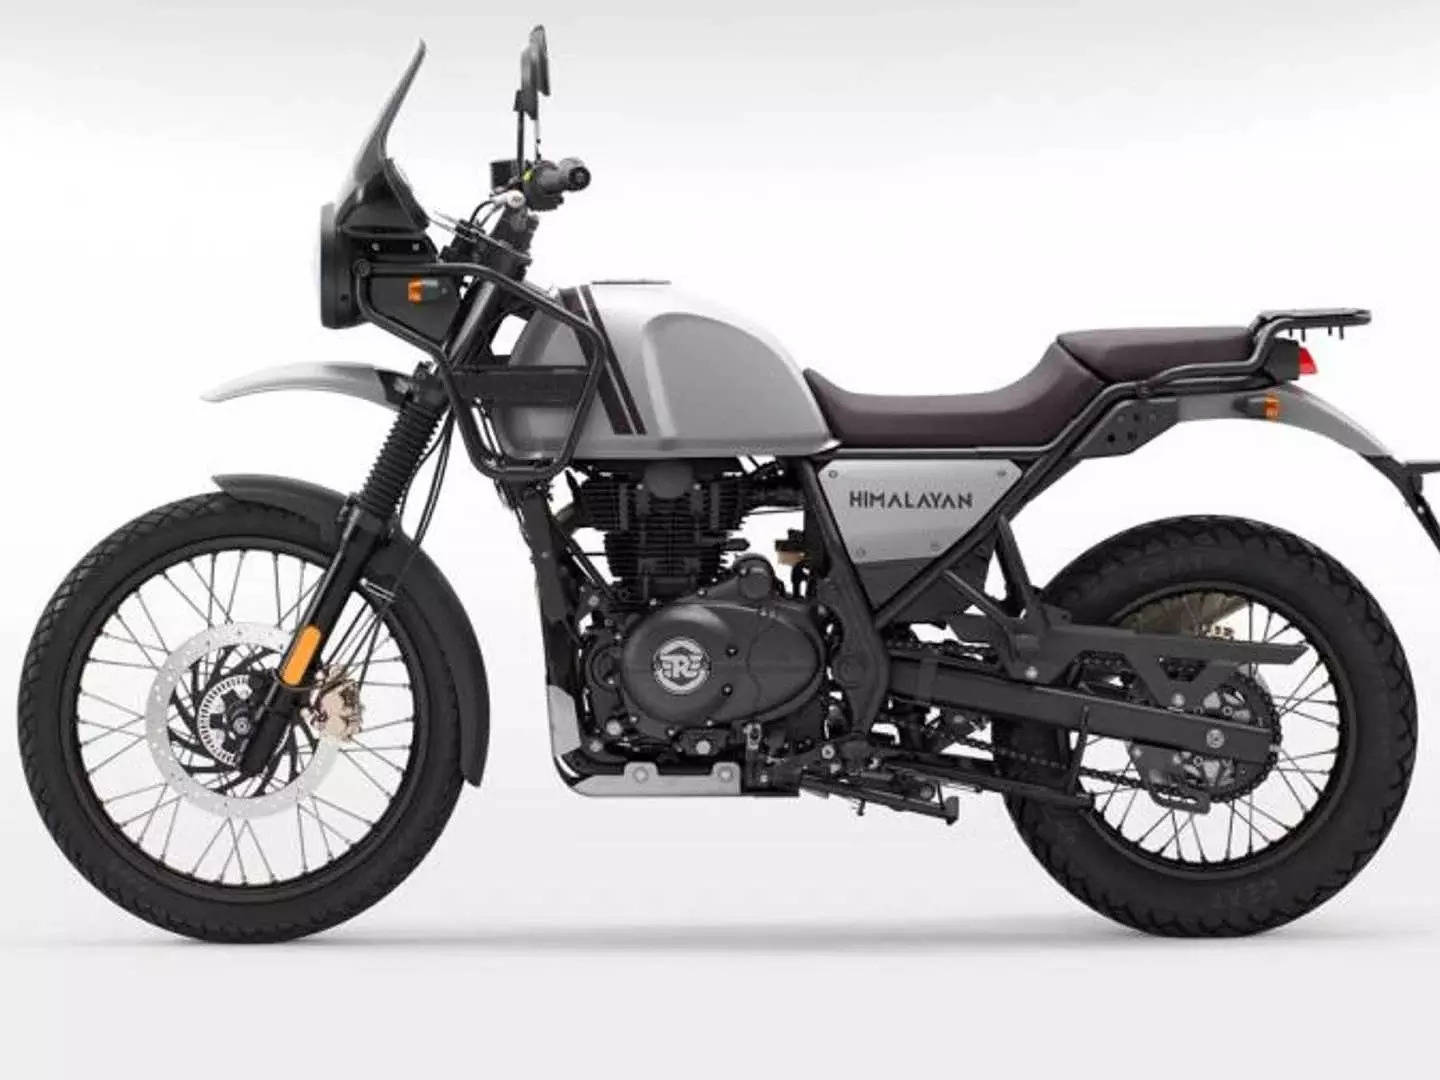 Six upcoming Royal Enfield Bikes in India: Bullet 350 to Super Meteor 650